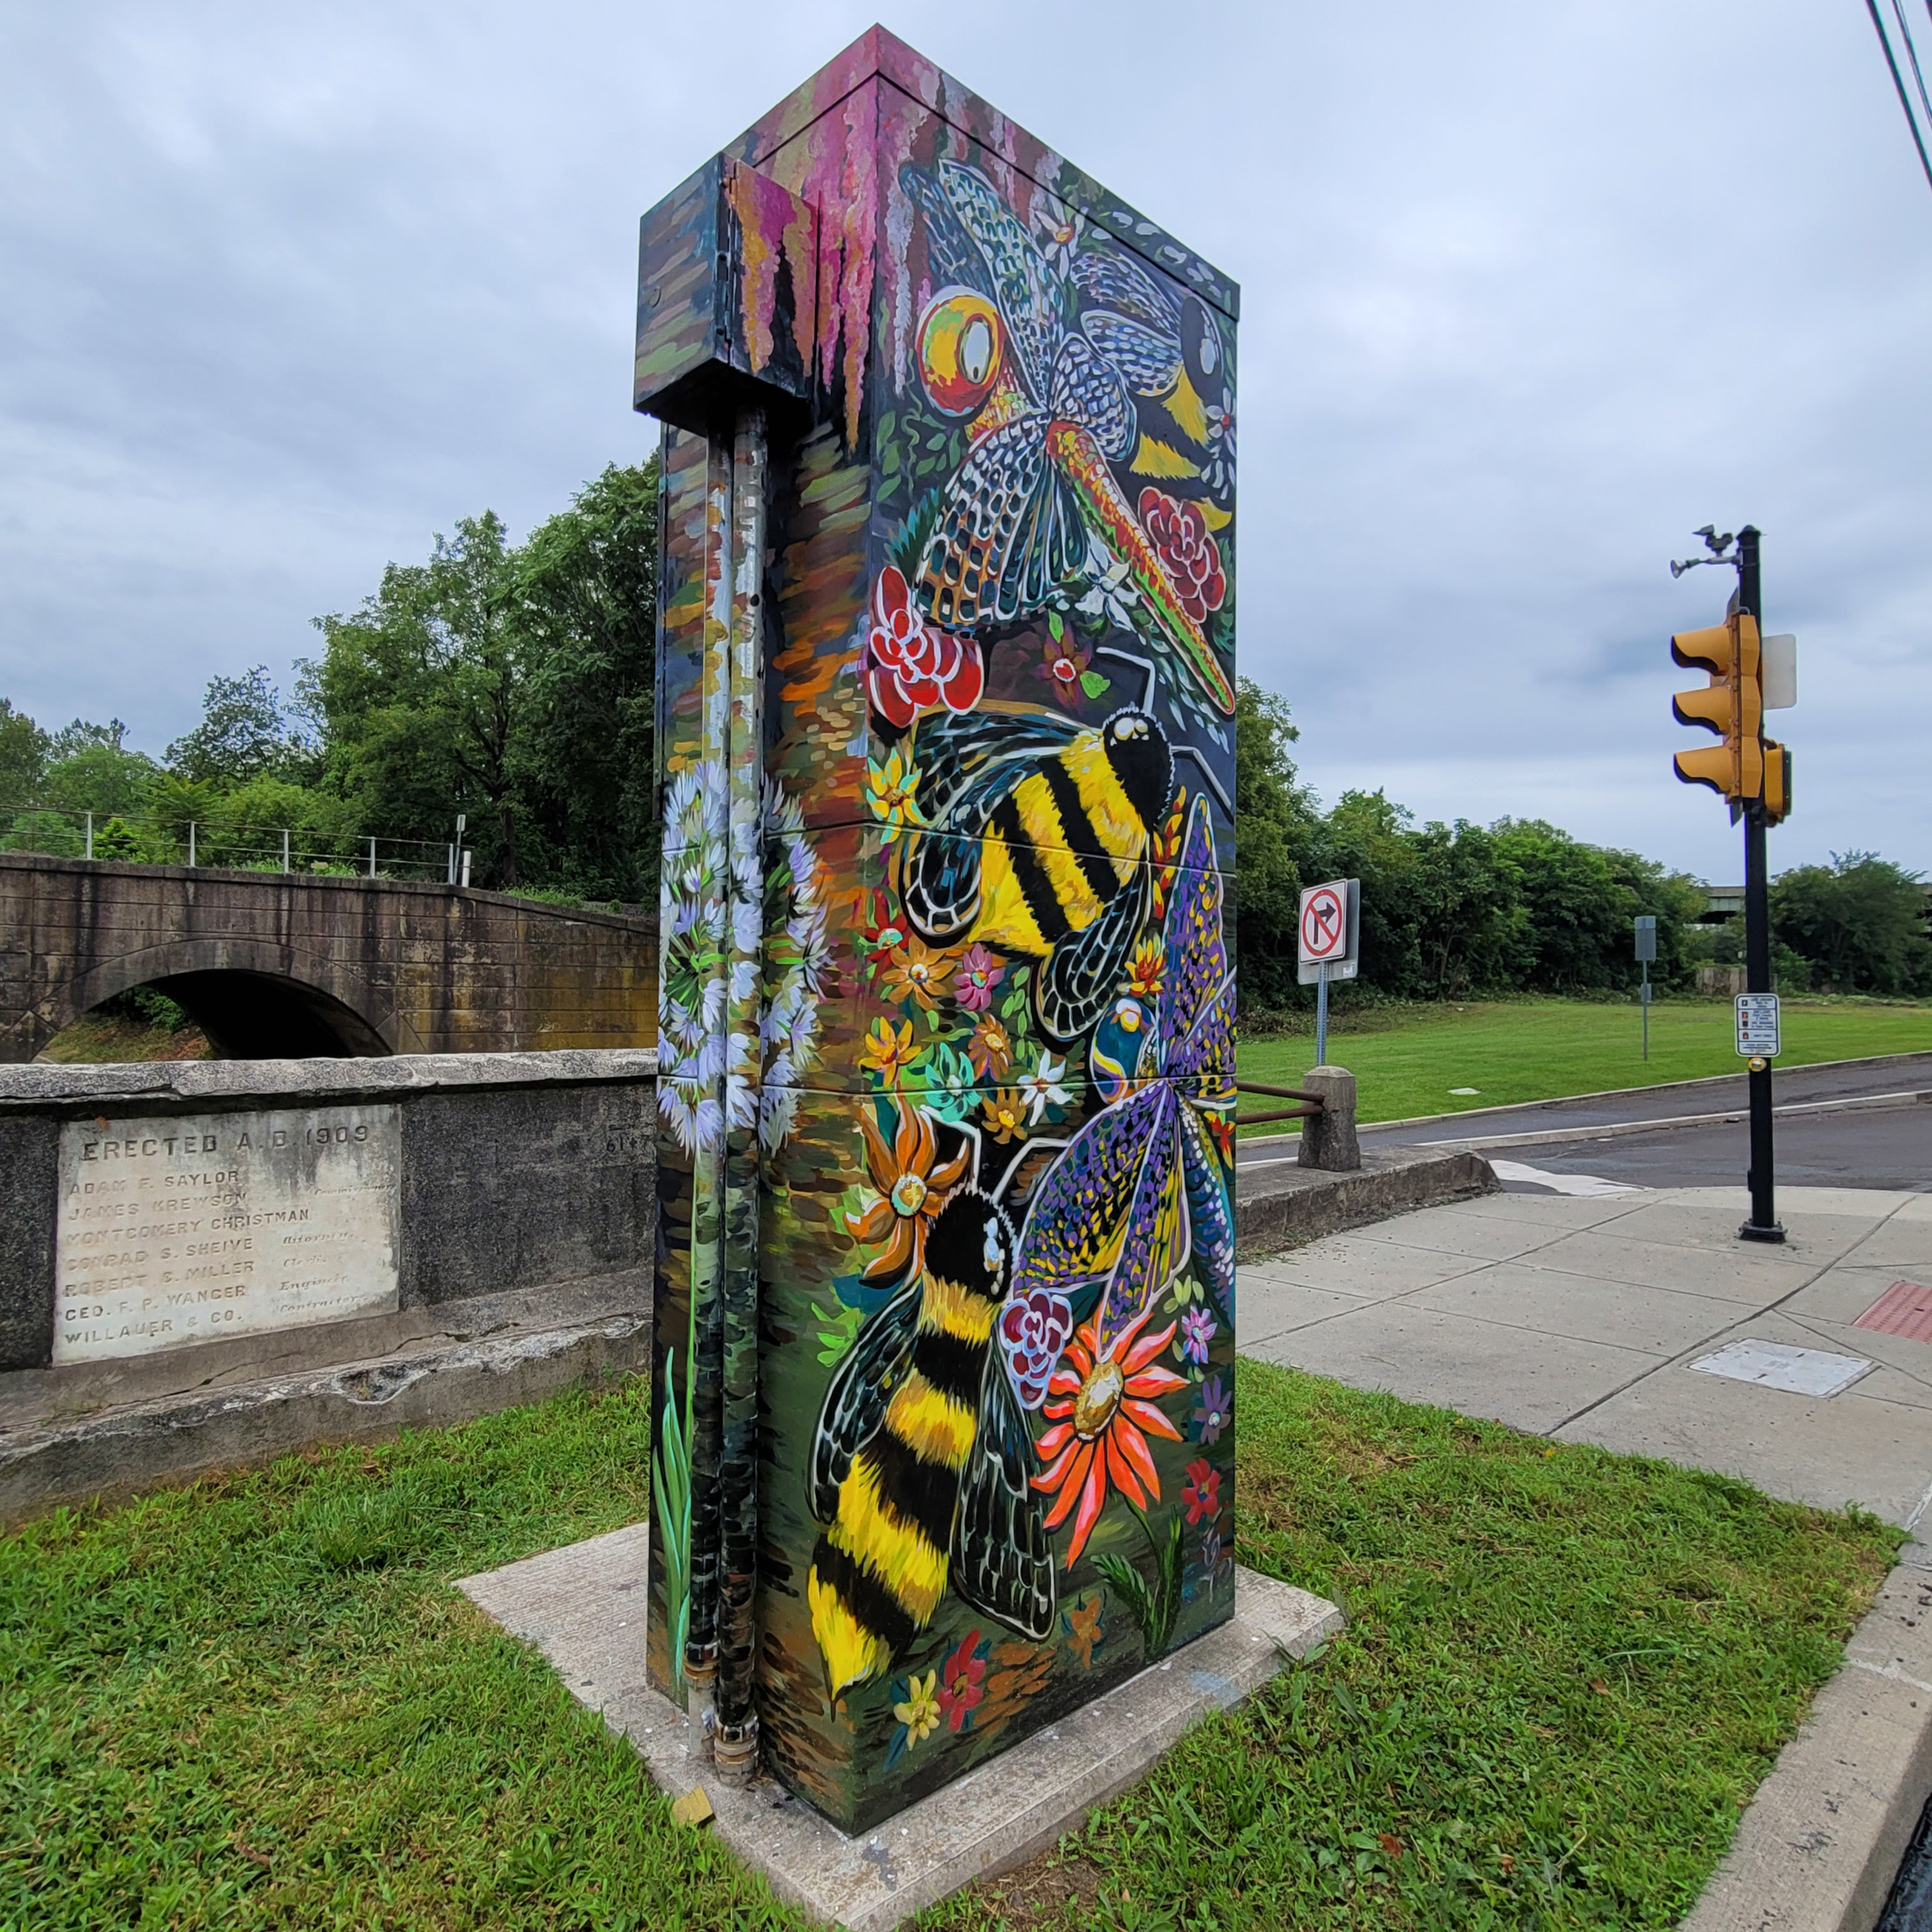 Love Murals on Pottstown Traffic Boxes? More are Planned